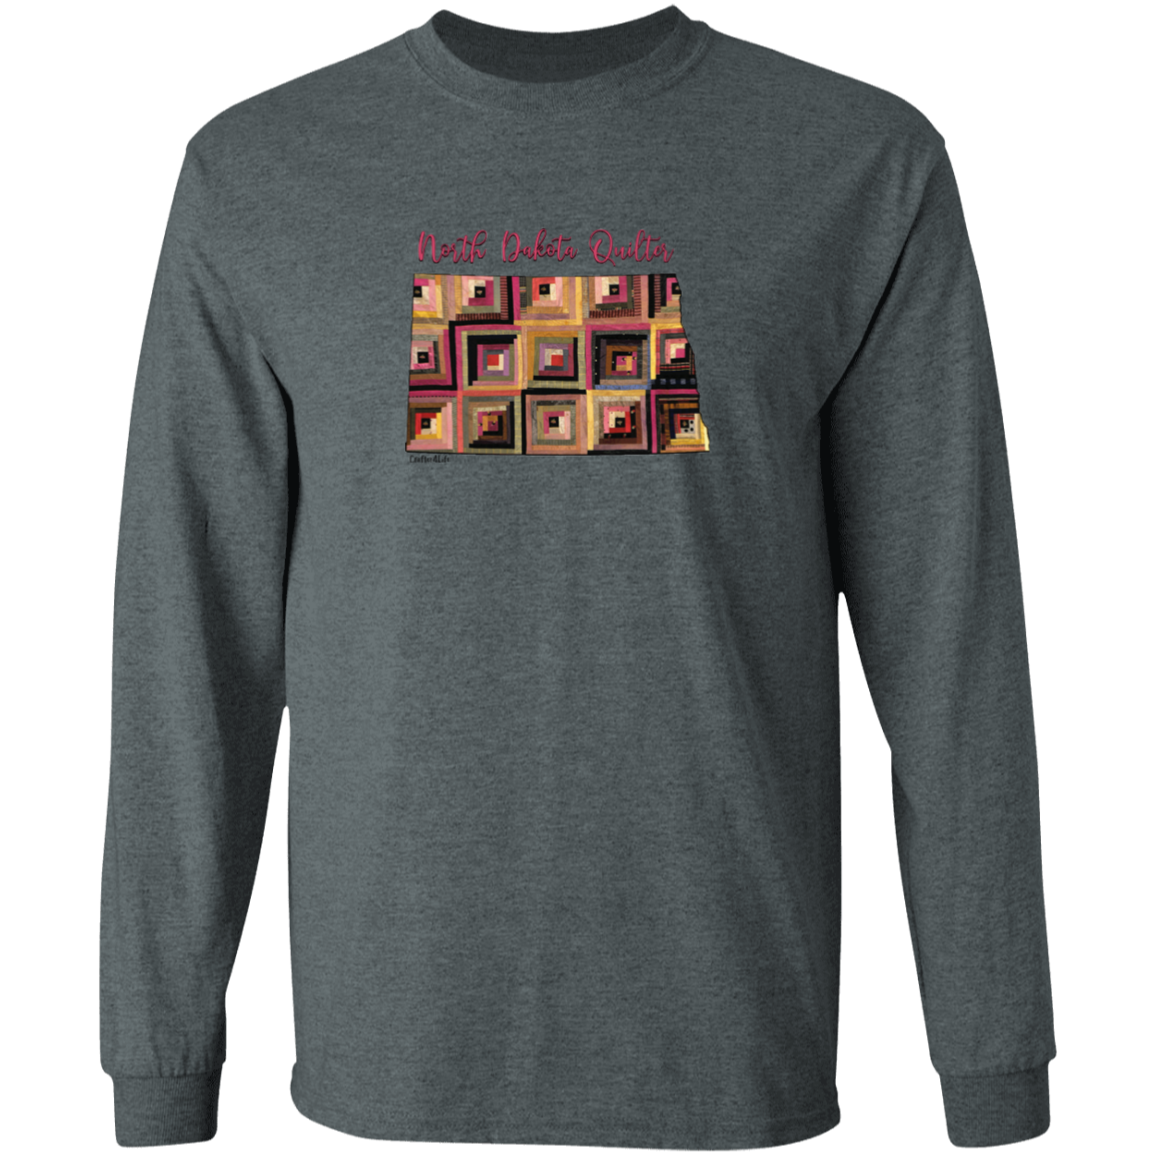 North Dakota Quilter Long Sleeve T-Shirt, Gift for Quilting Friends and Family